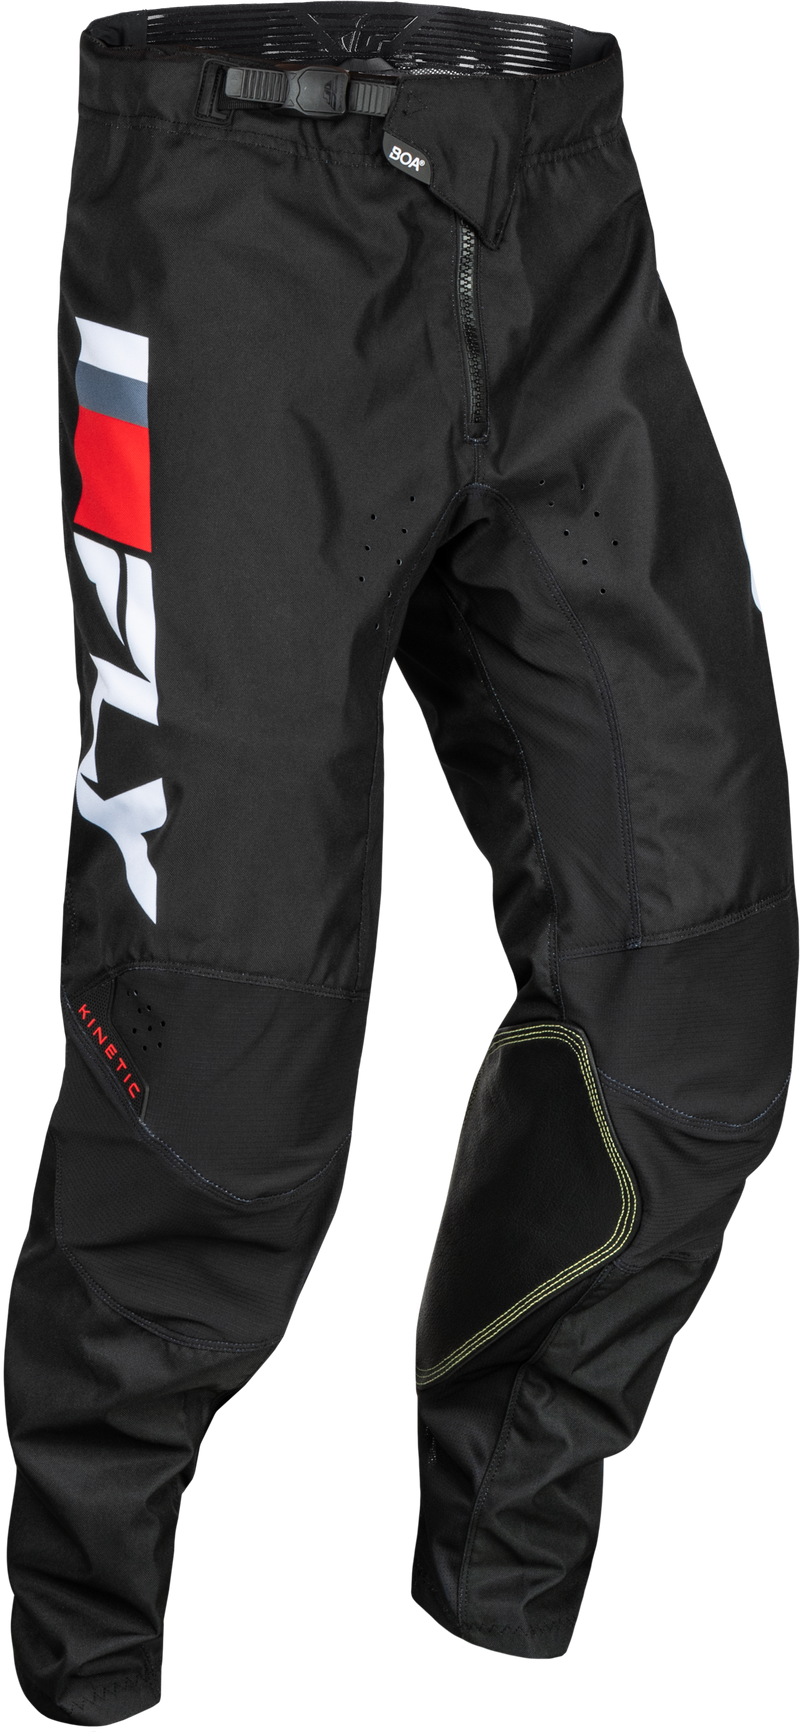 Fly Racing Kinetic Prix/Prodigy Youth Moto Gear Set - Pant and Jersey Combo